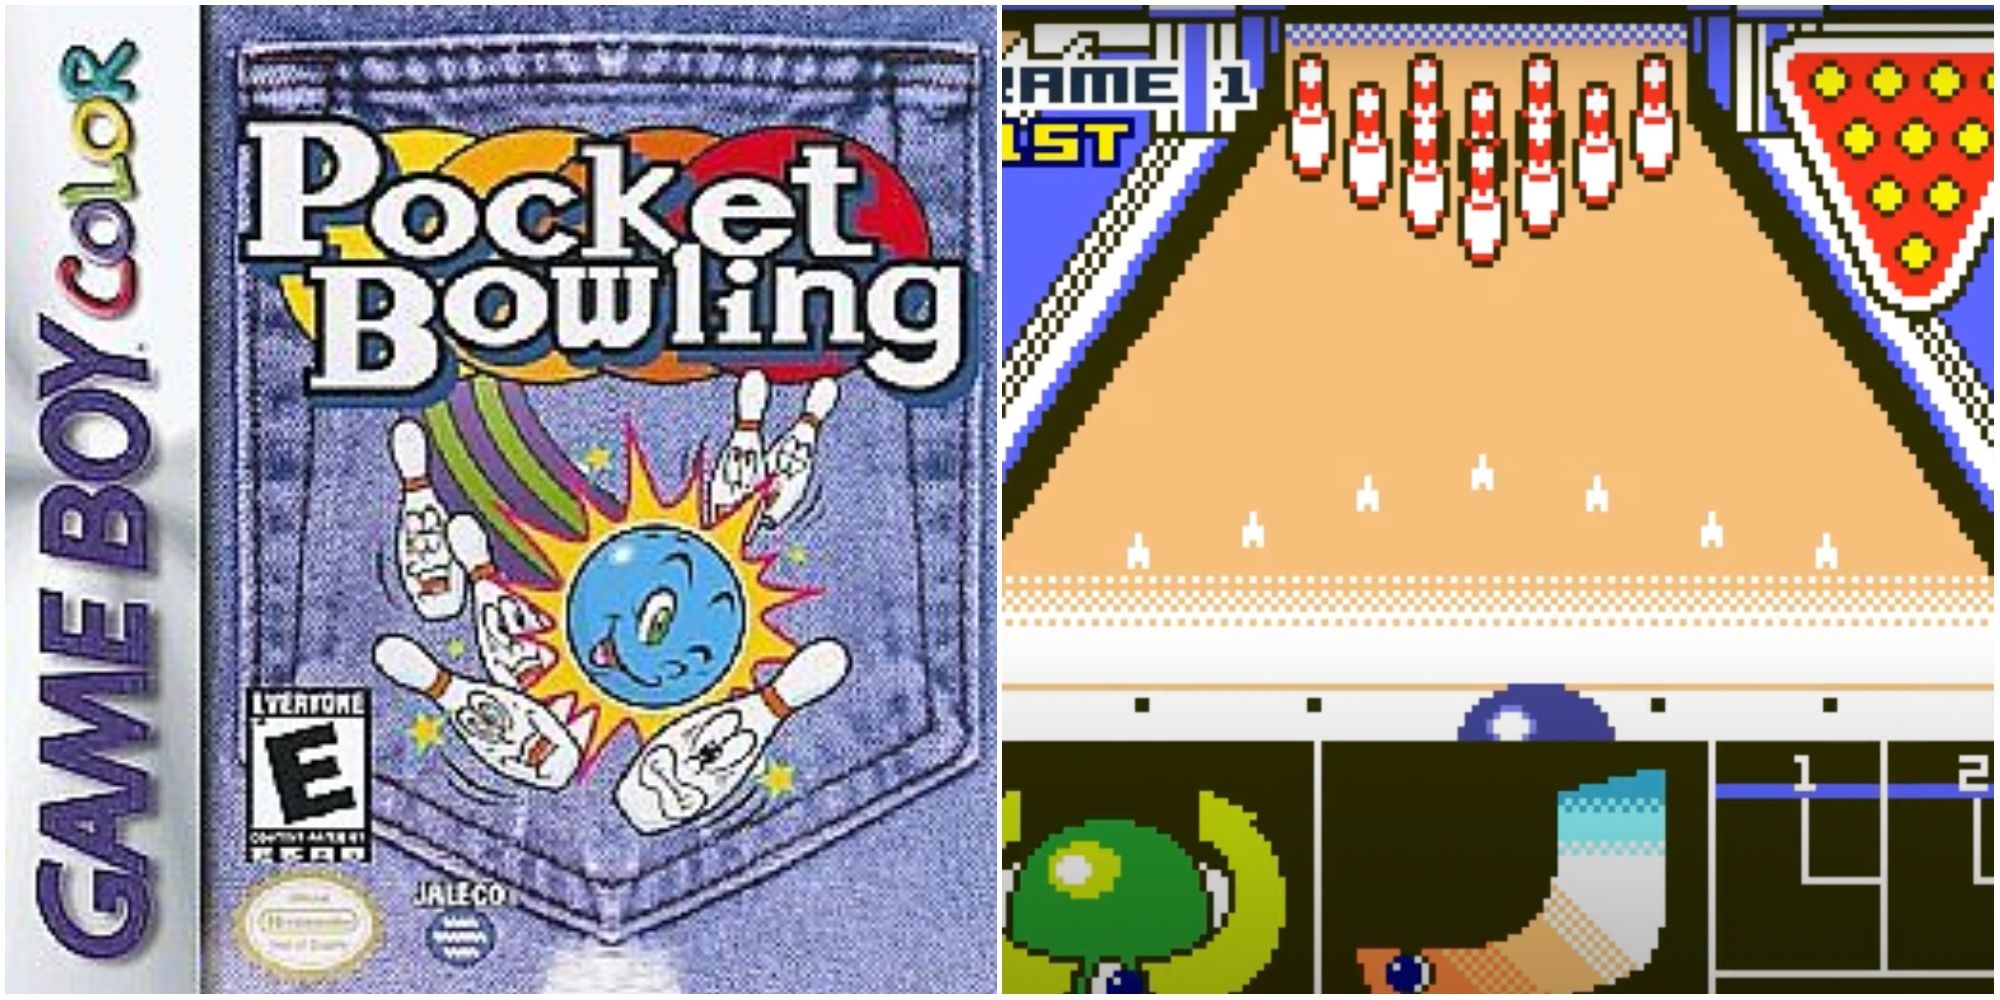 Pocket Bowling case cover and gameplay